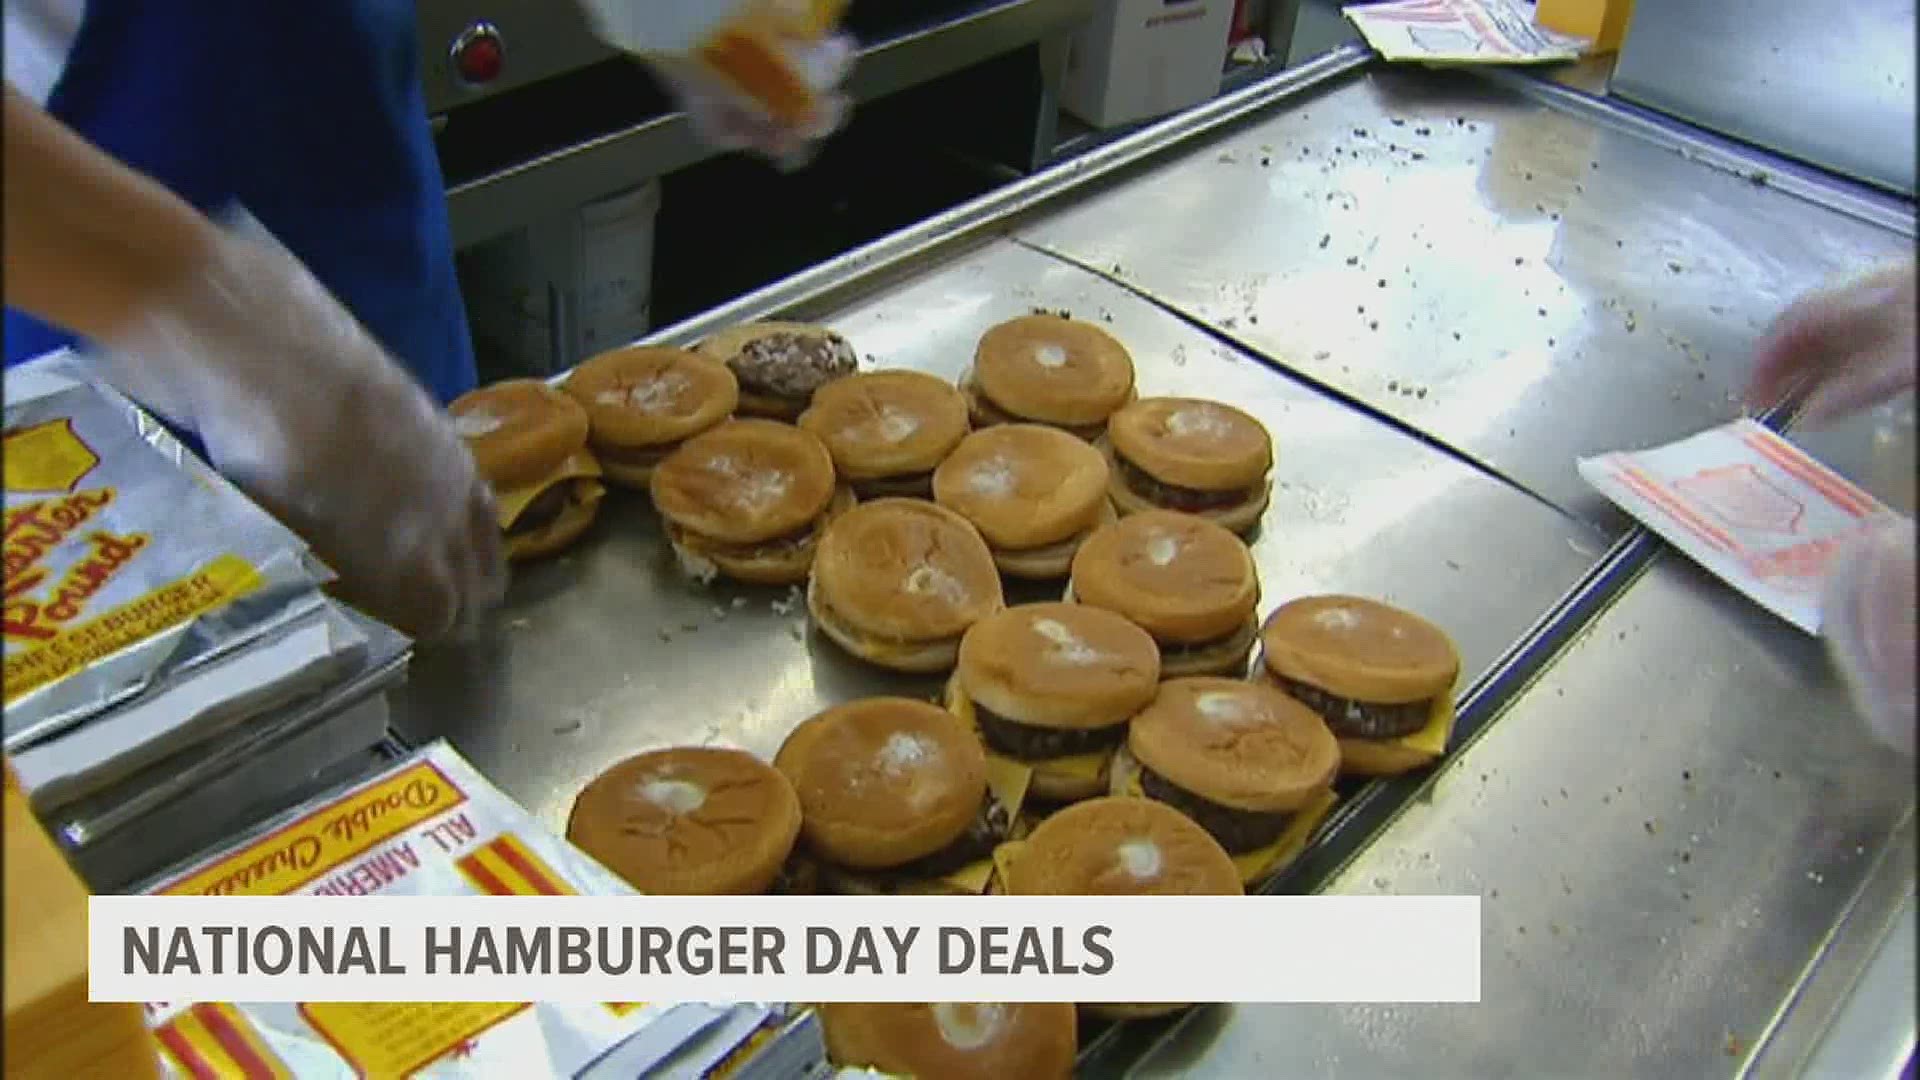 Hamburgers have become a culinary icon across the United States.